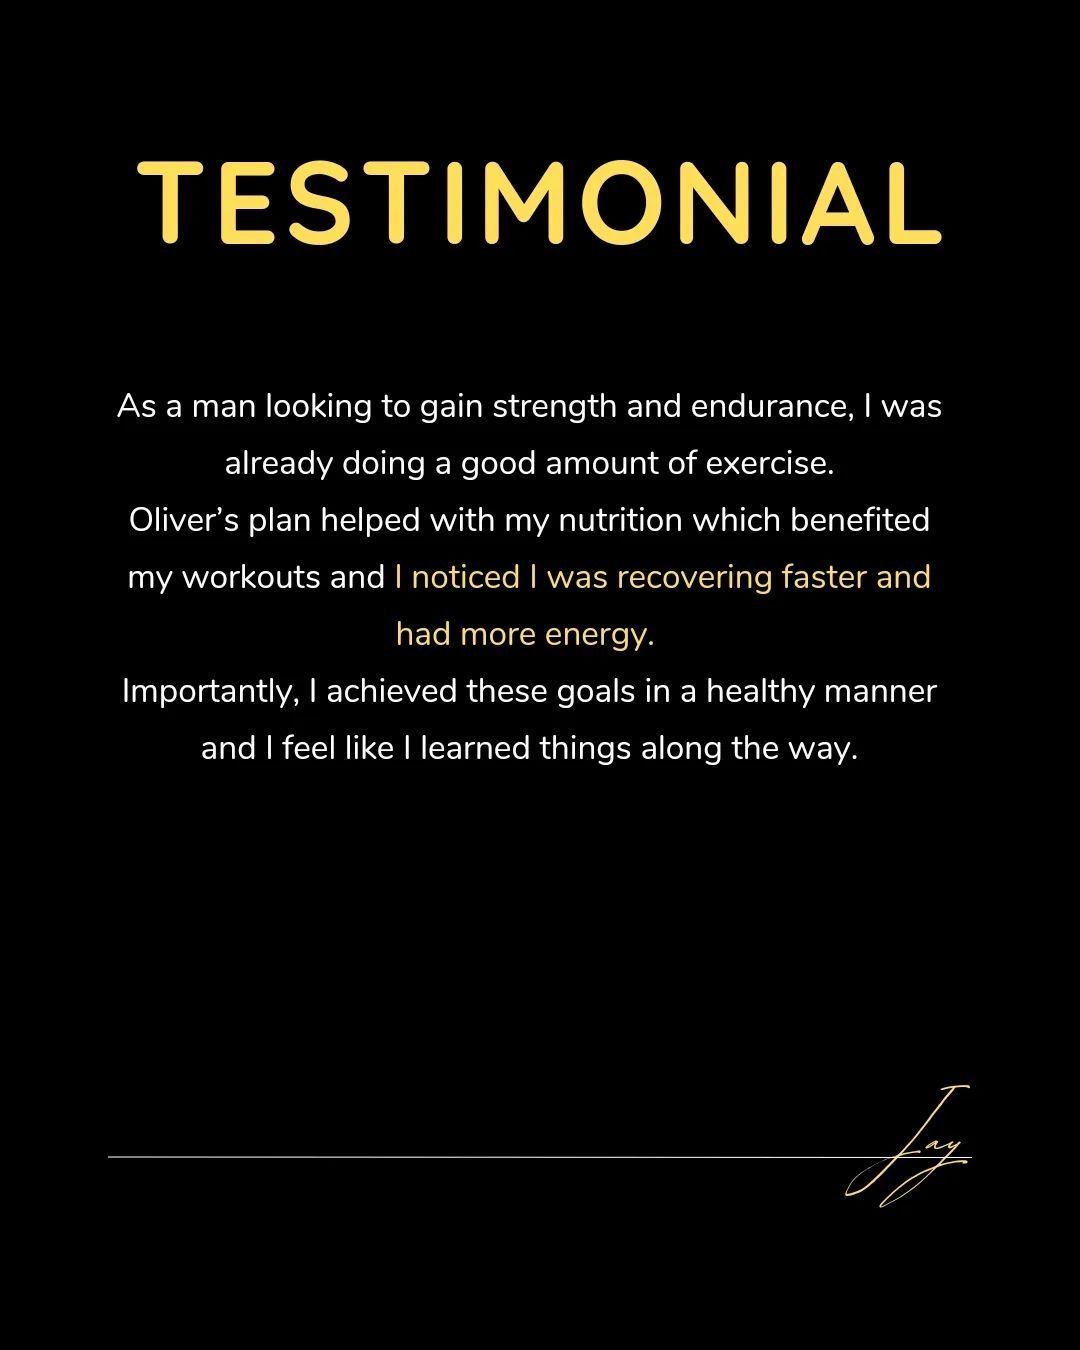 Not everyone that comes to see me wants to lose weight. This was the case with Jay, who was actually looking to gain weight (in the form of muscle) and needed help optimising his nutrition to speed up his results.

Although he was big into fitness, h